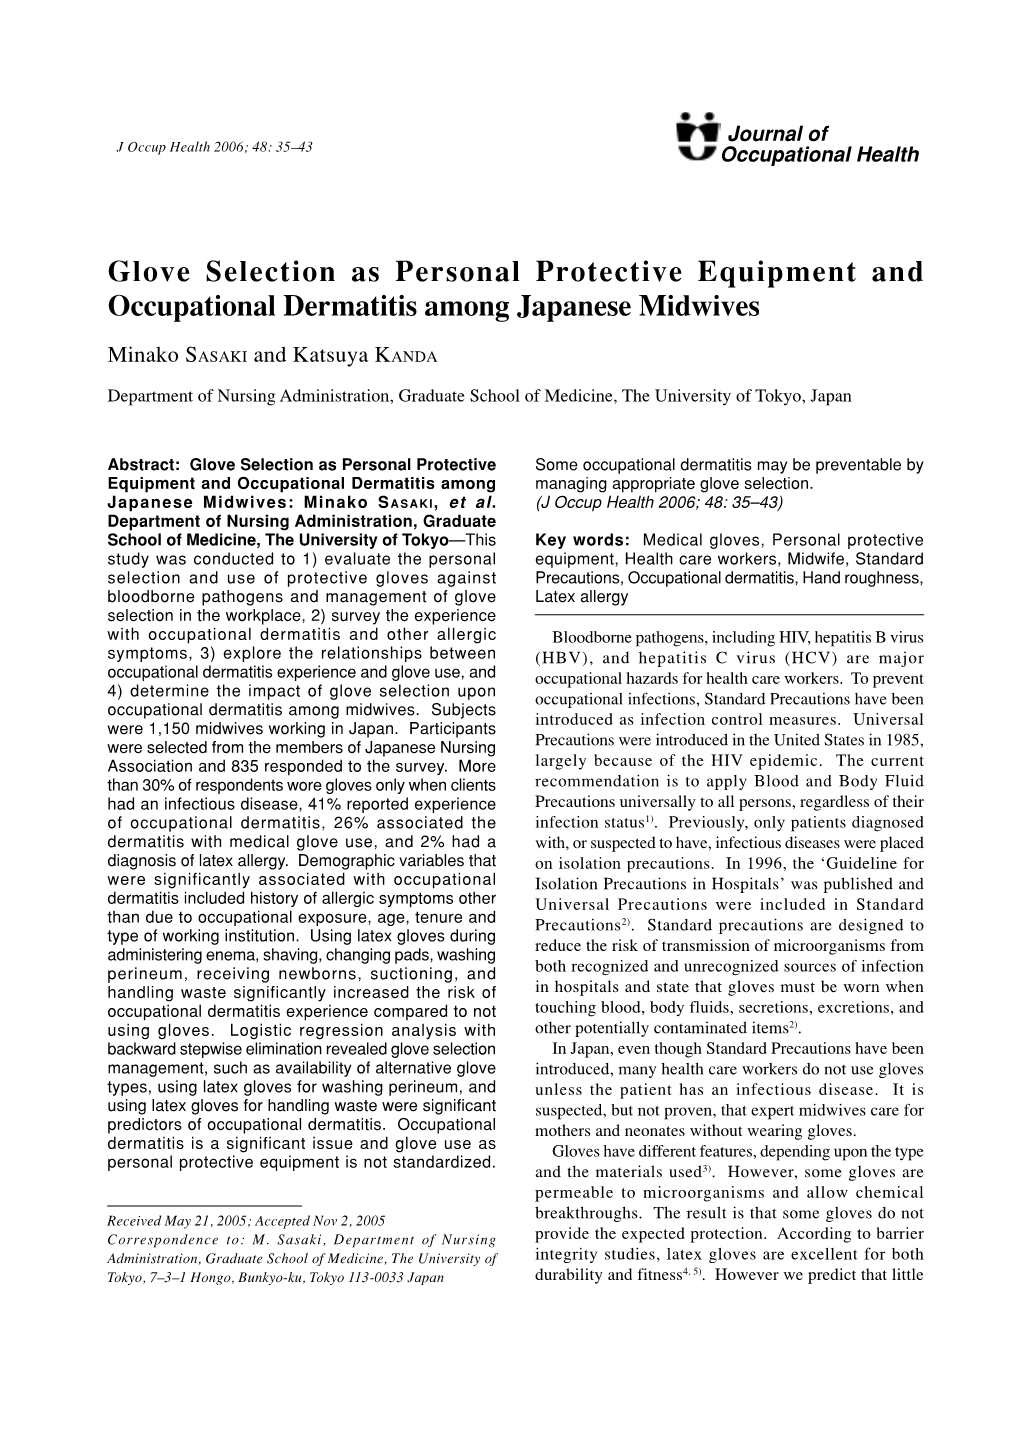 Glove Selection As Personal Protective Equipment and Occupational Dermatitis Among Japanese Midwives